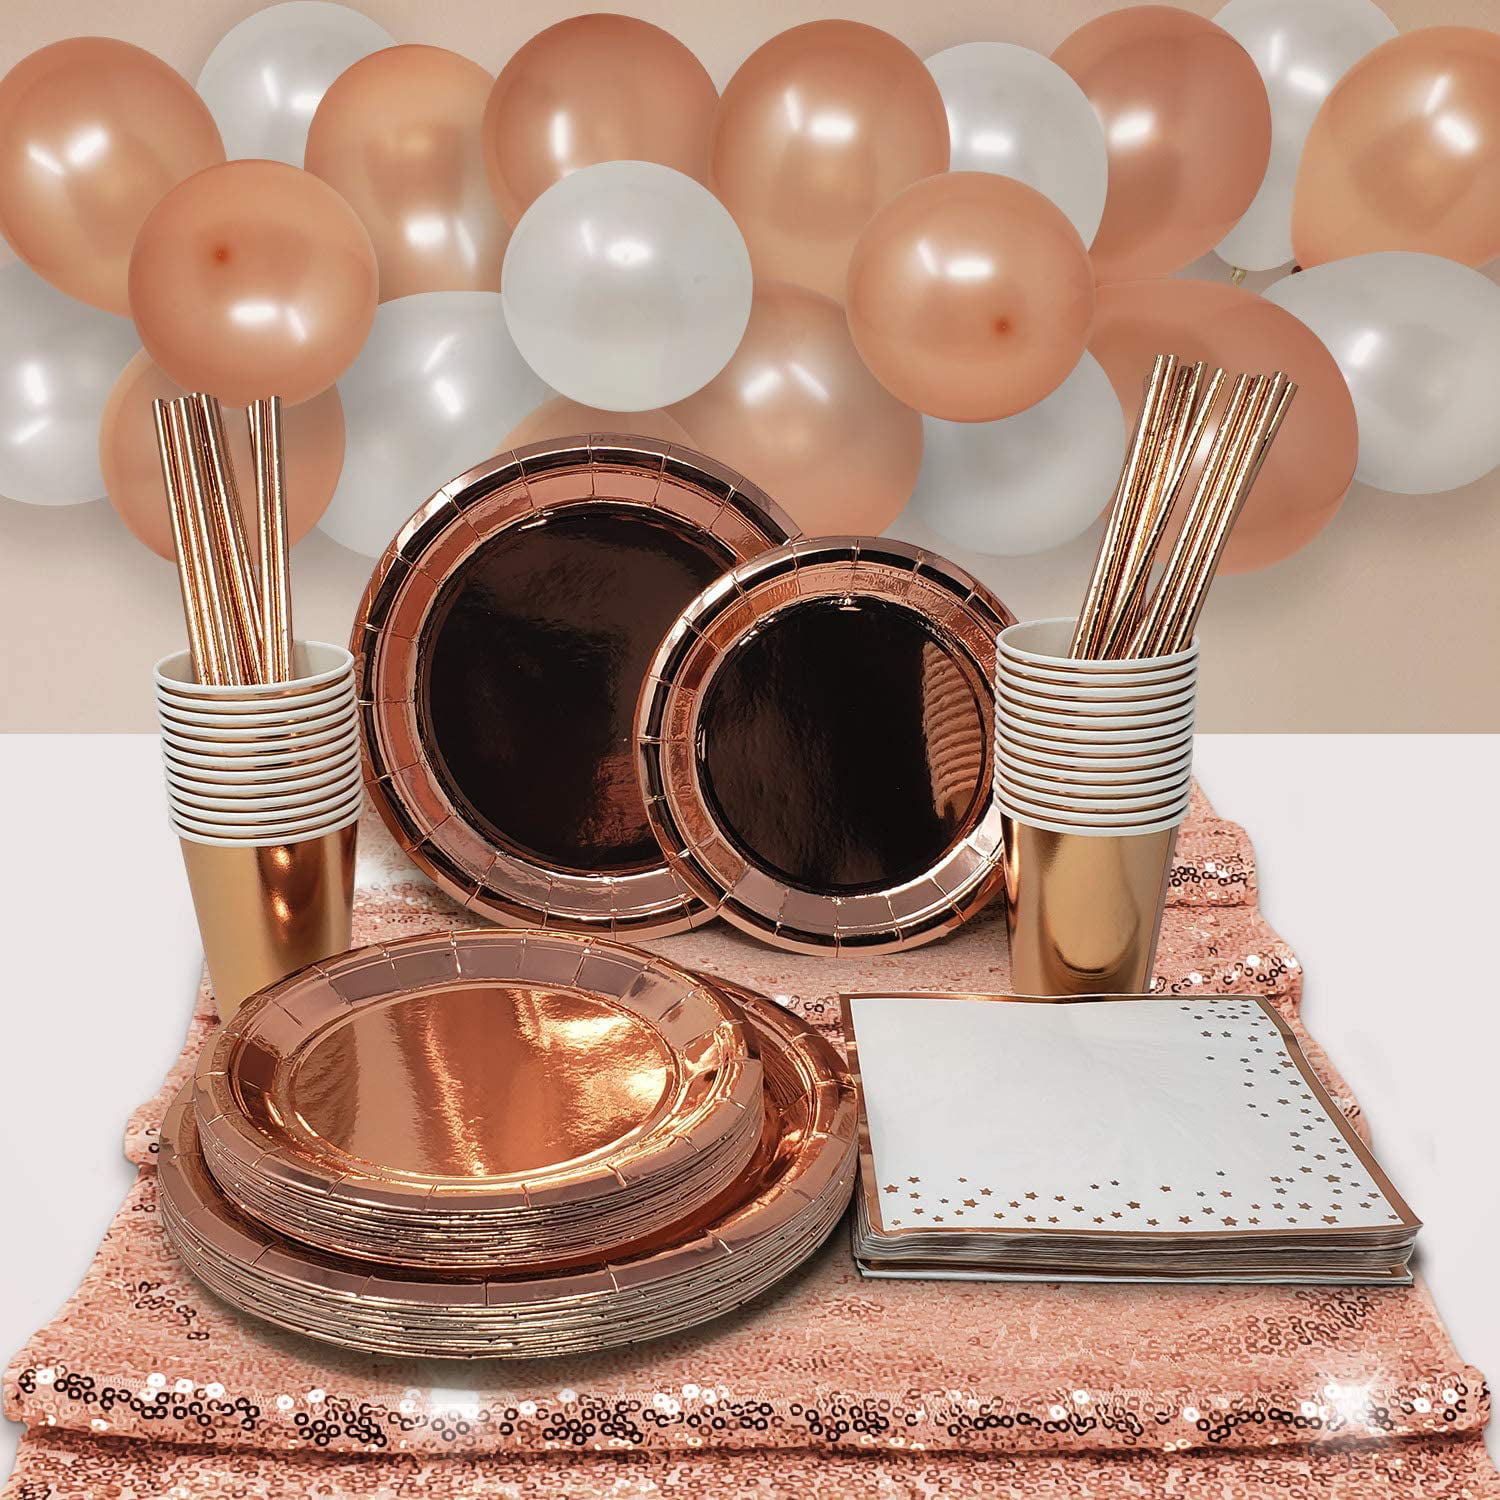 iZoeL 30 Guests Rose Gold Party Tableware Paper Dinnerware Plates Cups Straws Napkins Party Supplies for Birthday Party Baby Shower Bridal Wedding Anniversary